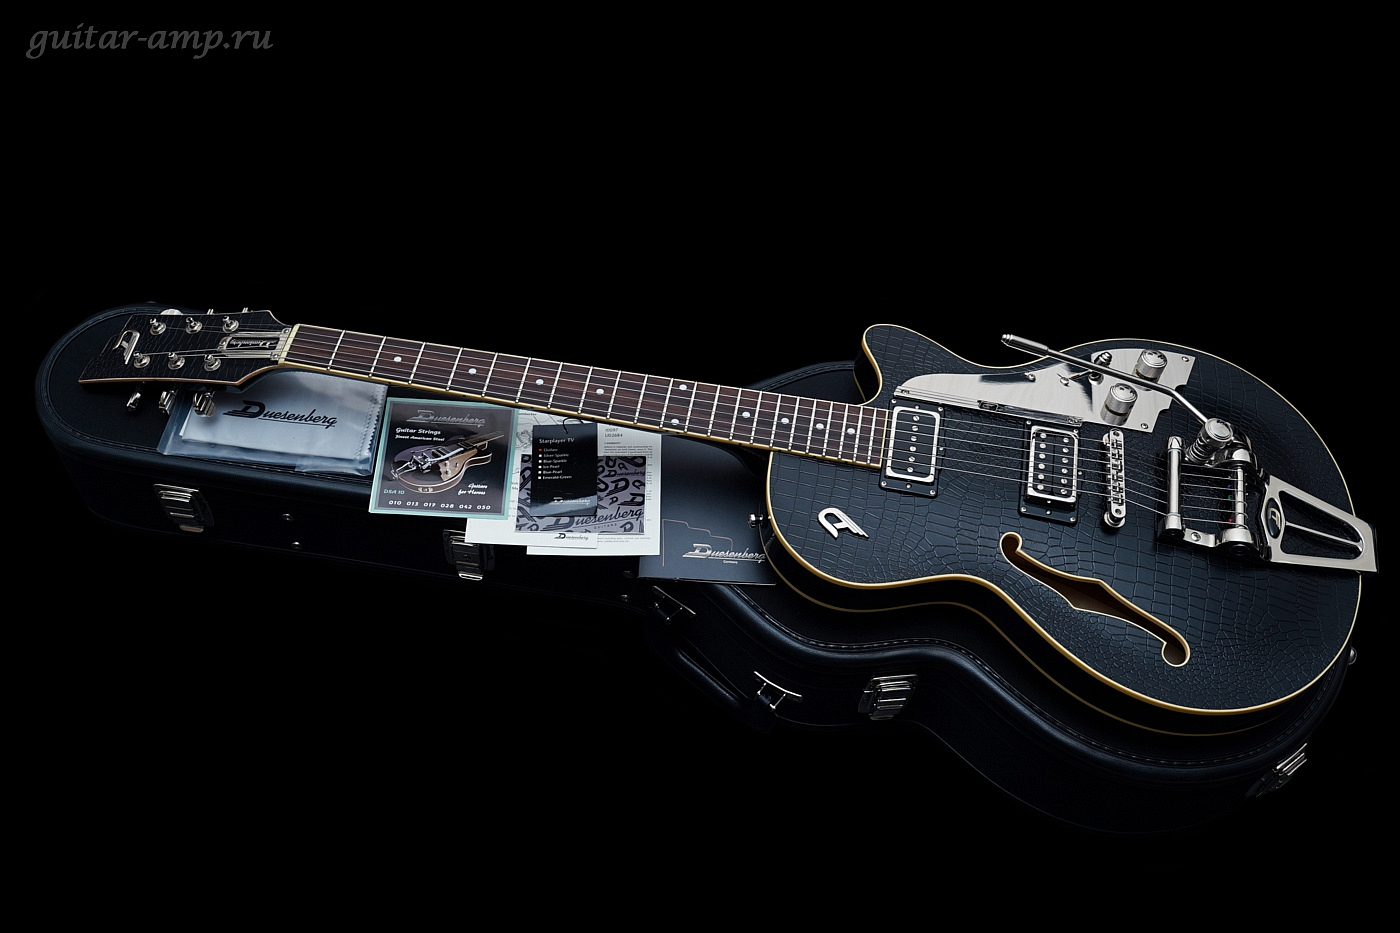 Duesenberg Starplayer TV with Tremolo System Outlaw Limited Run 2010